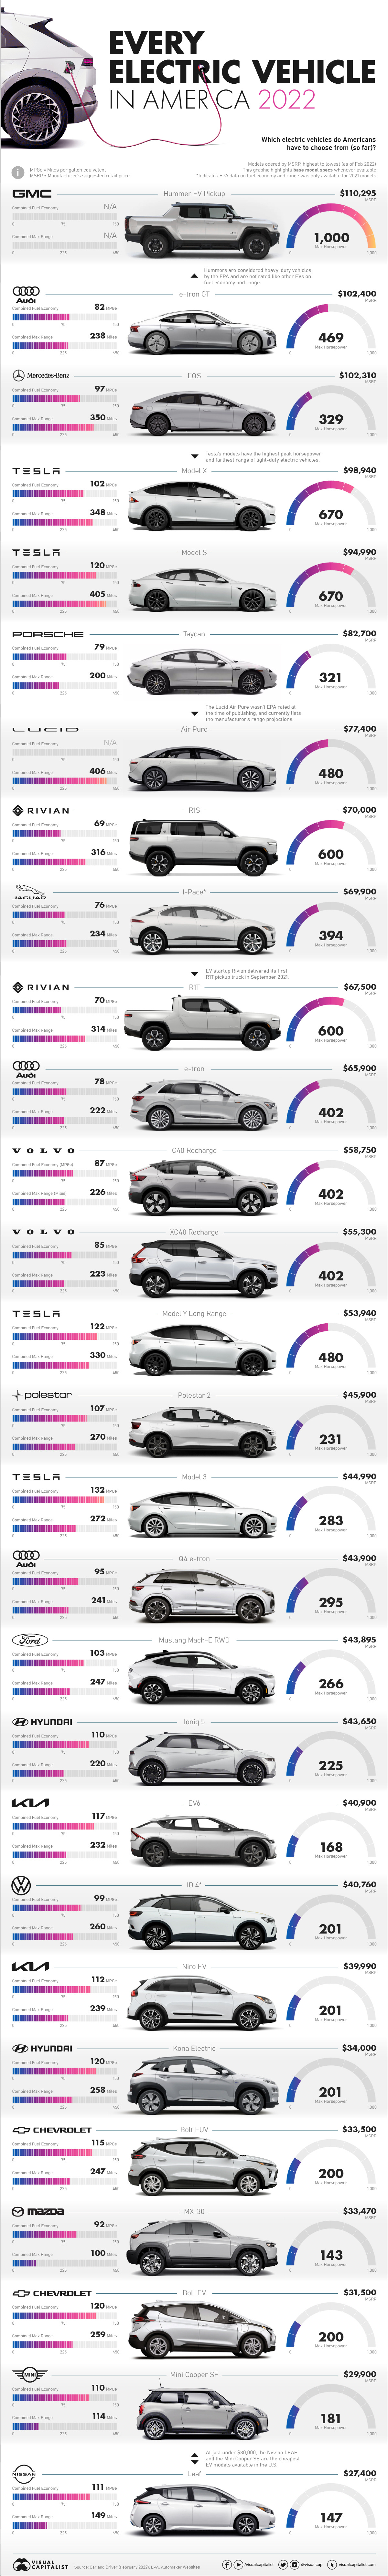 Graphic showcasing all electric car models available in the U.S.